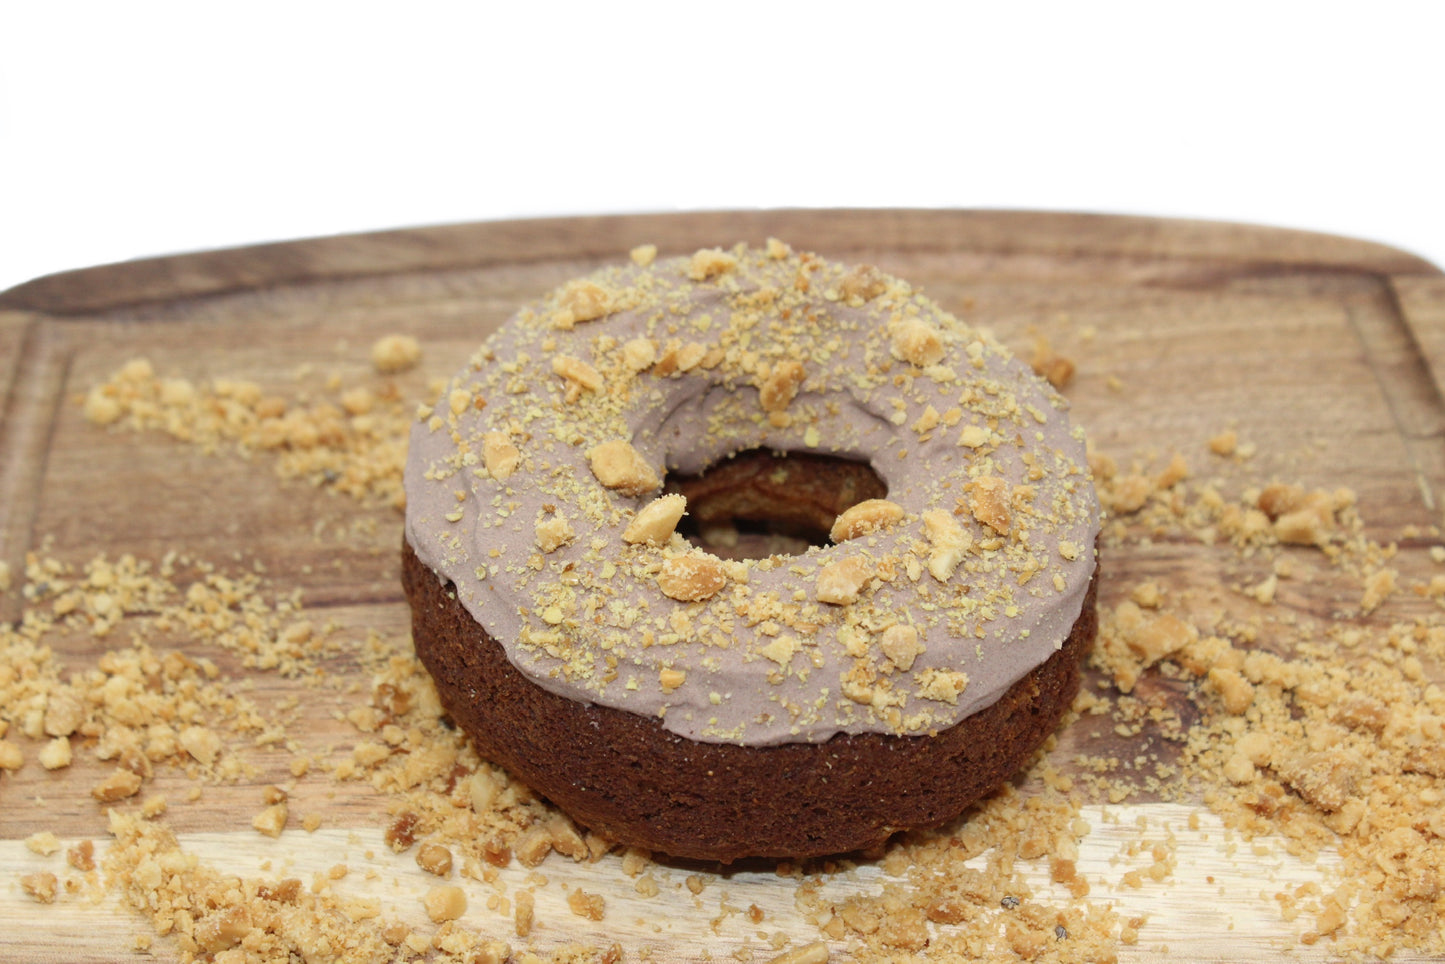 A apple and banana flavored dog donut with brown, carob frosting that has peanuts and flaxseed on top.